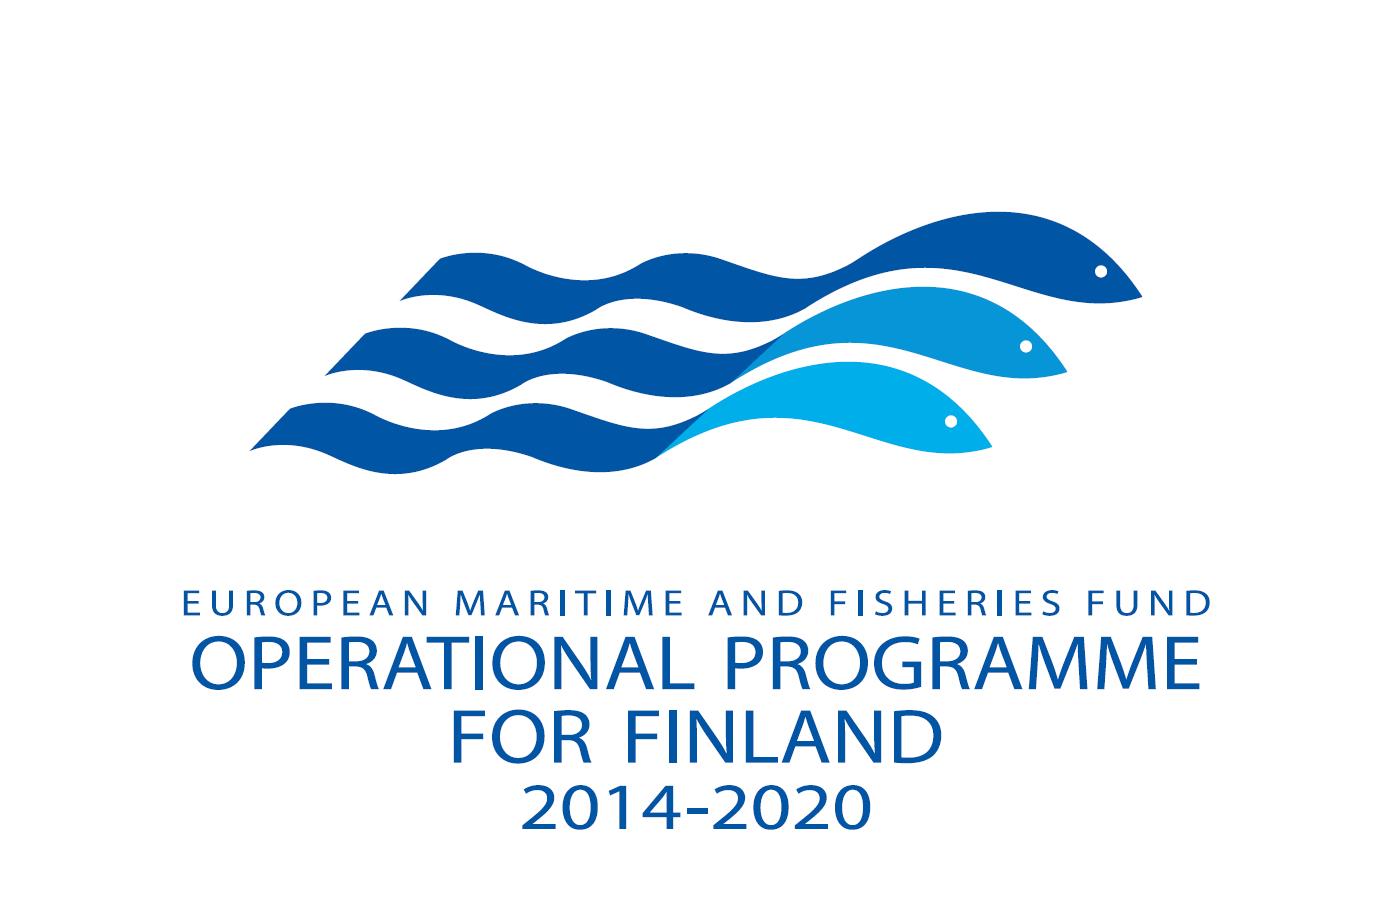 European Maritime and Fisheries Fund operational programme for Finland logo